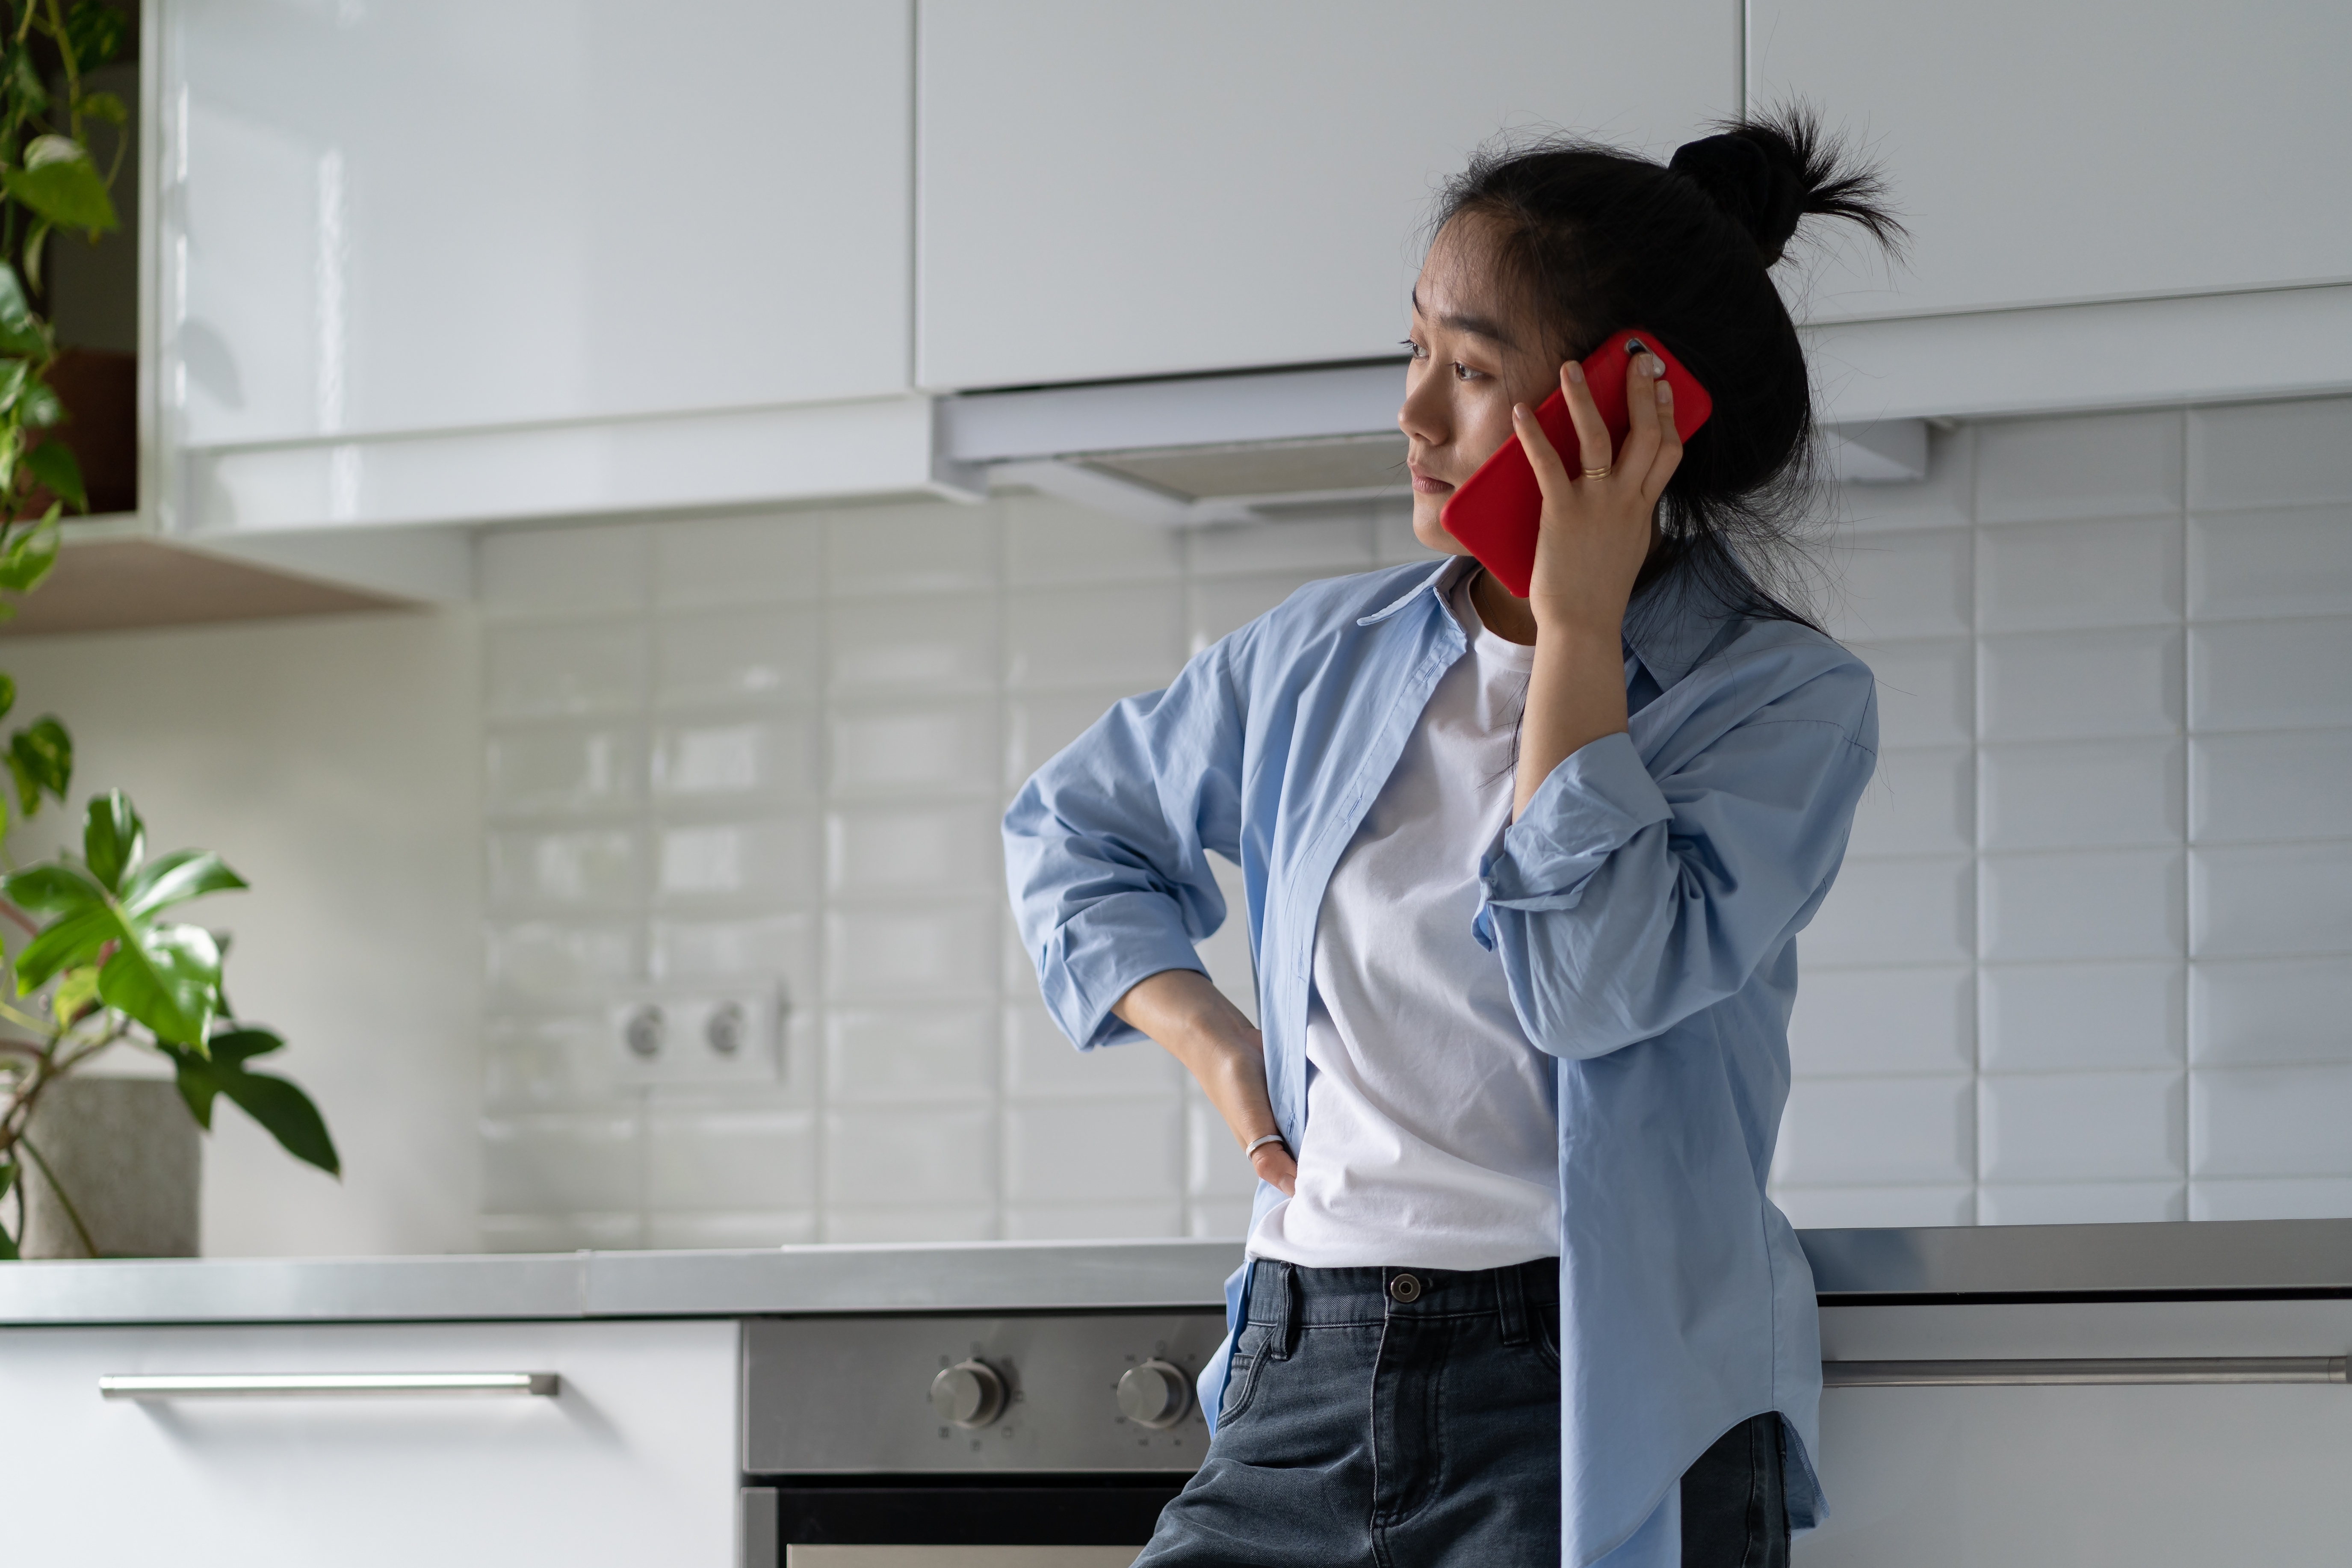 A young, worried woman on the phone | Source: Shutterstock